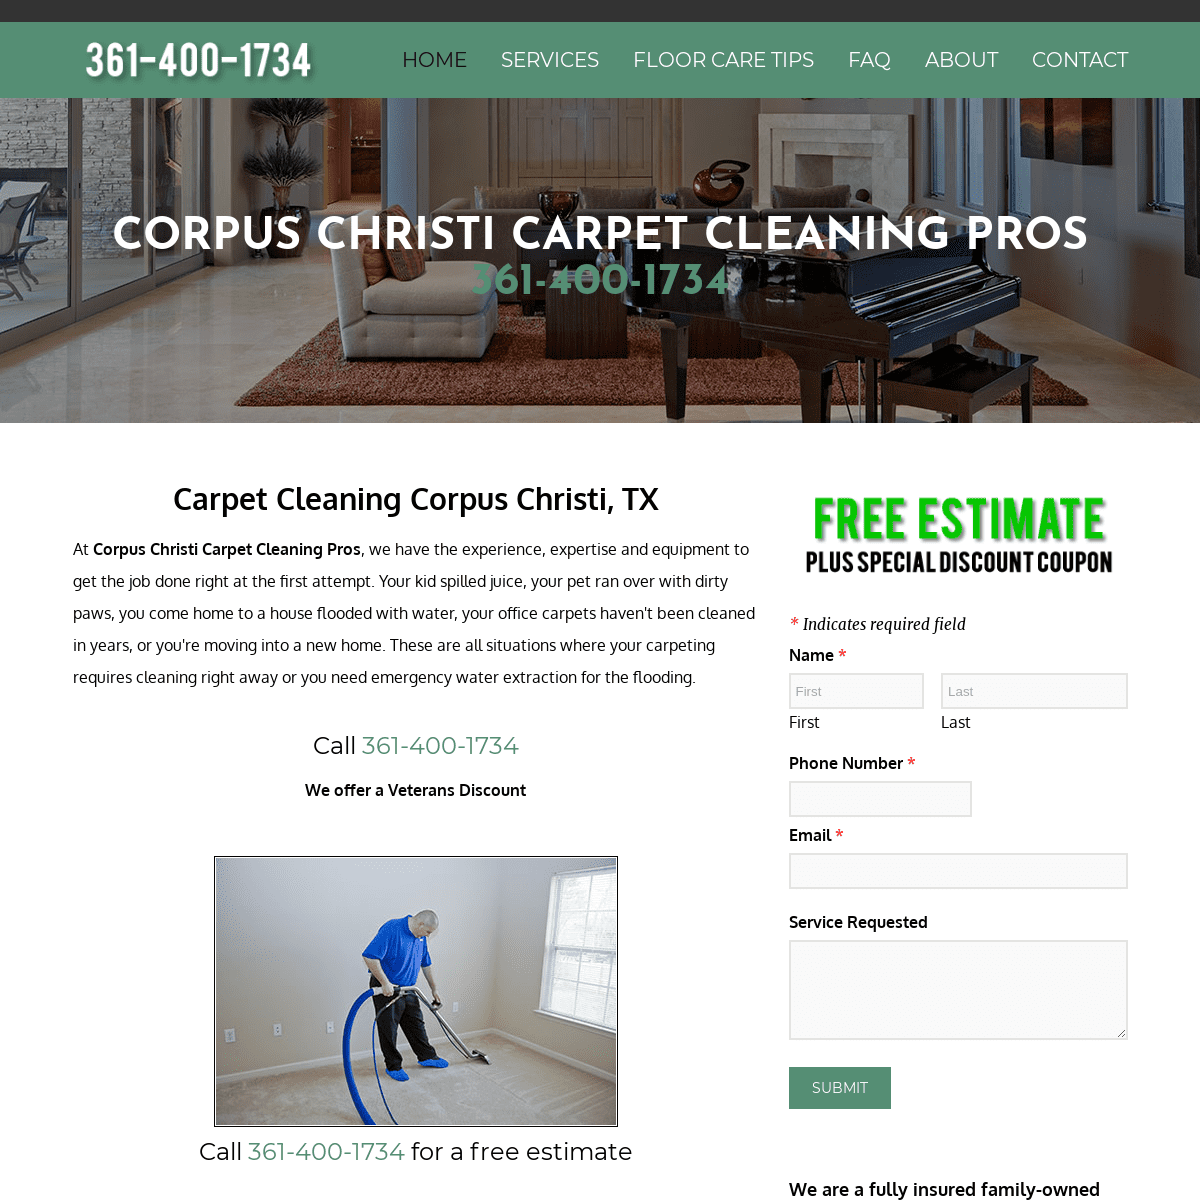 Carpet Cleaning Pros - Tile & Carpet Cleaners in Corpus Christi, TX